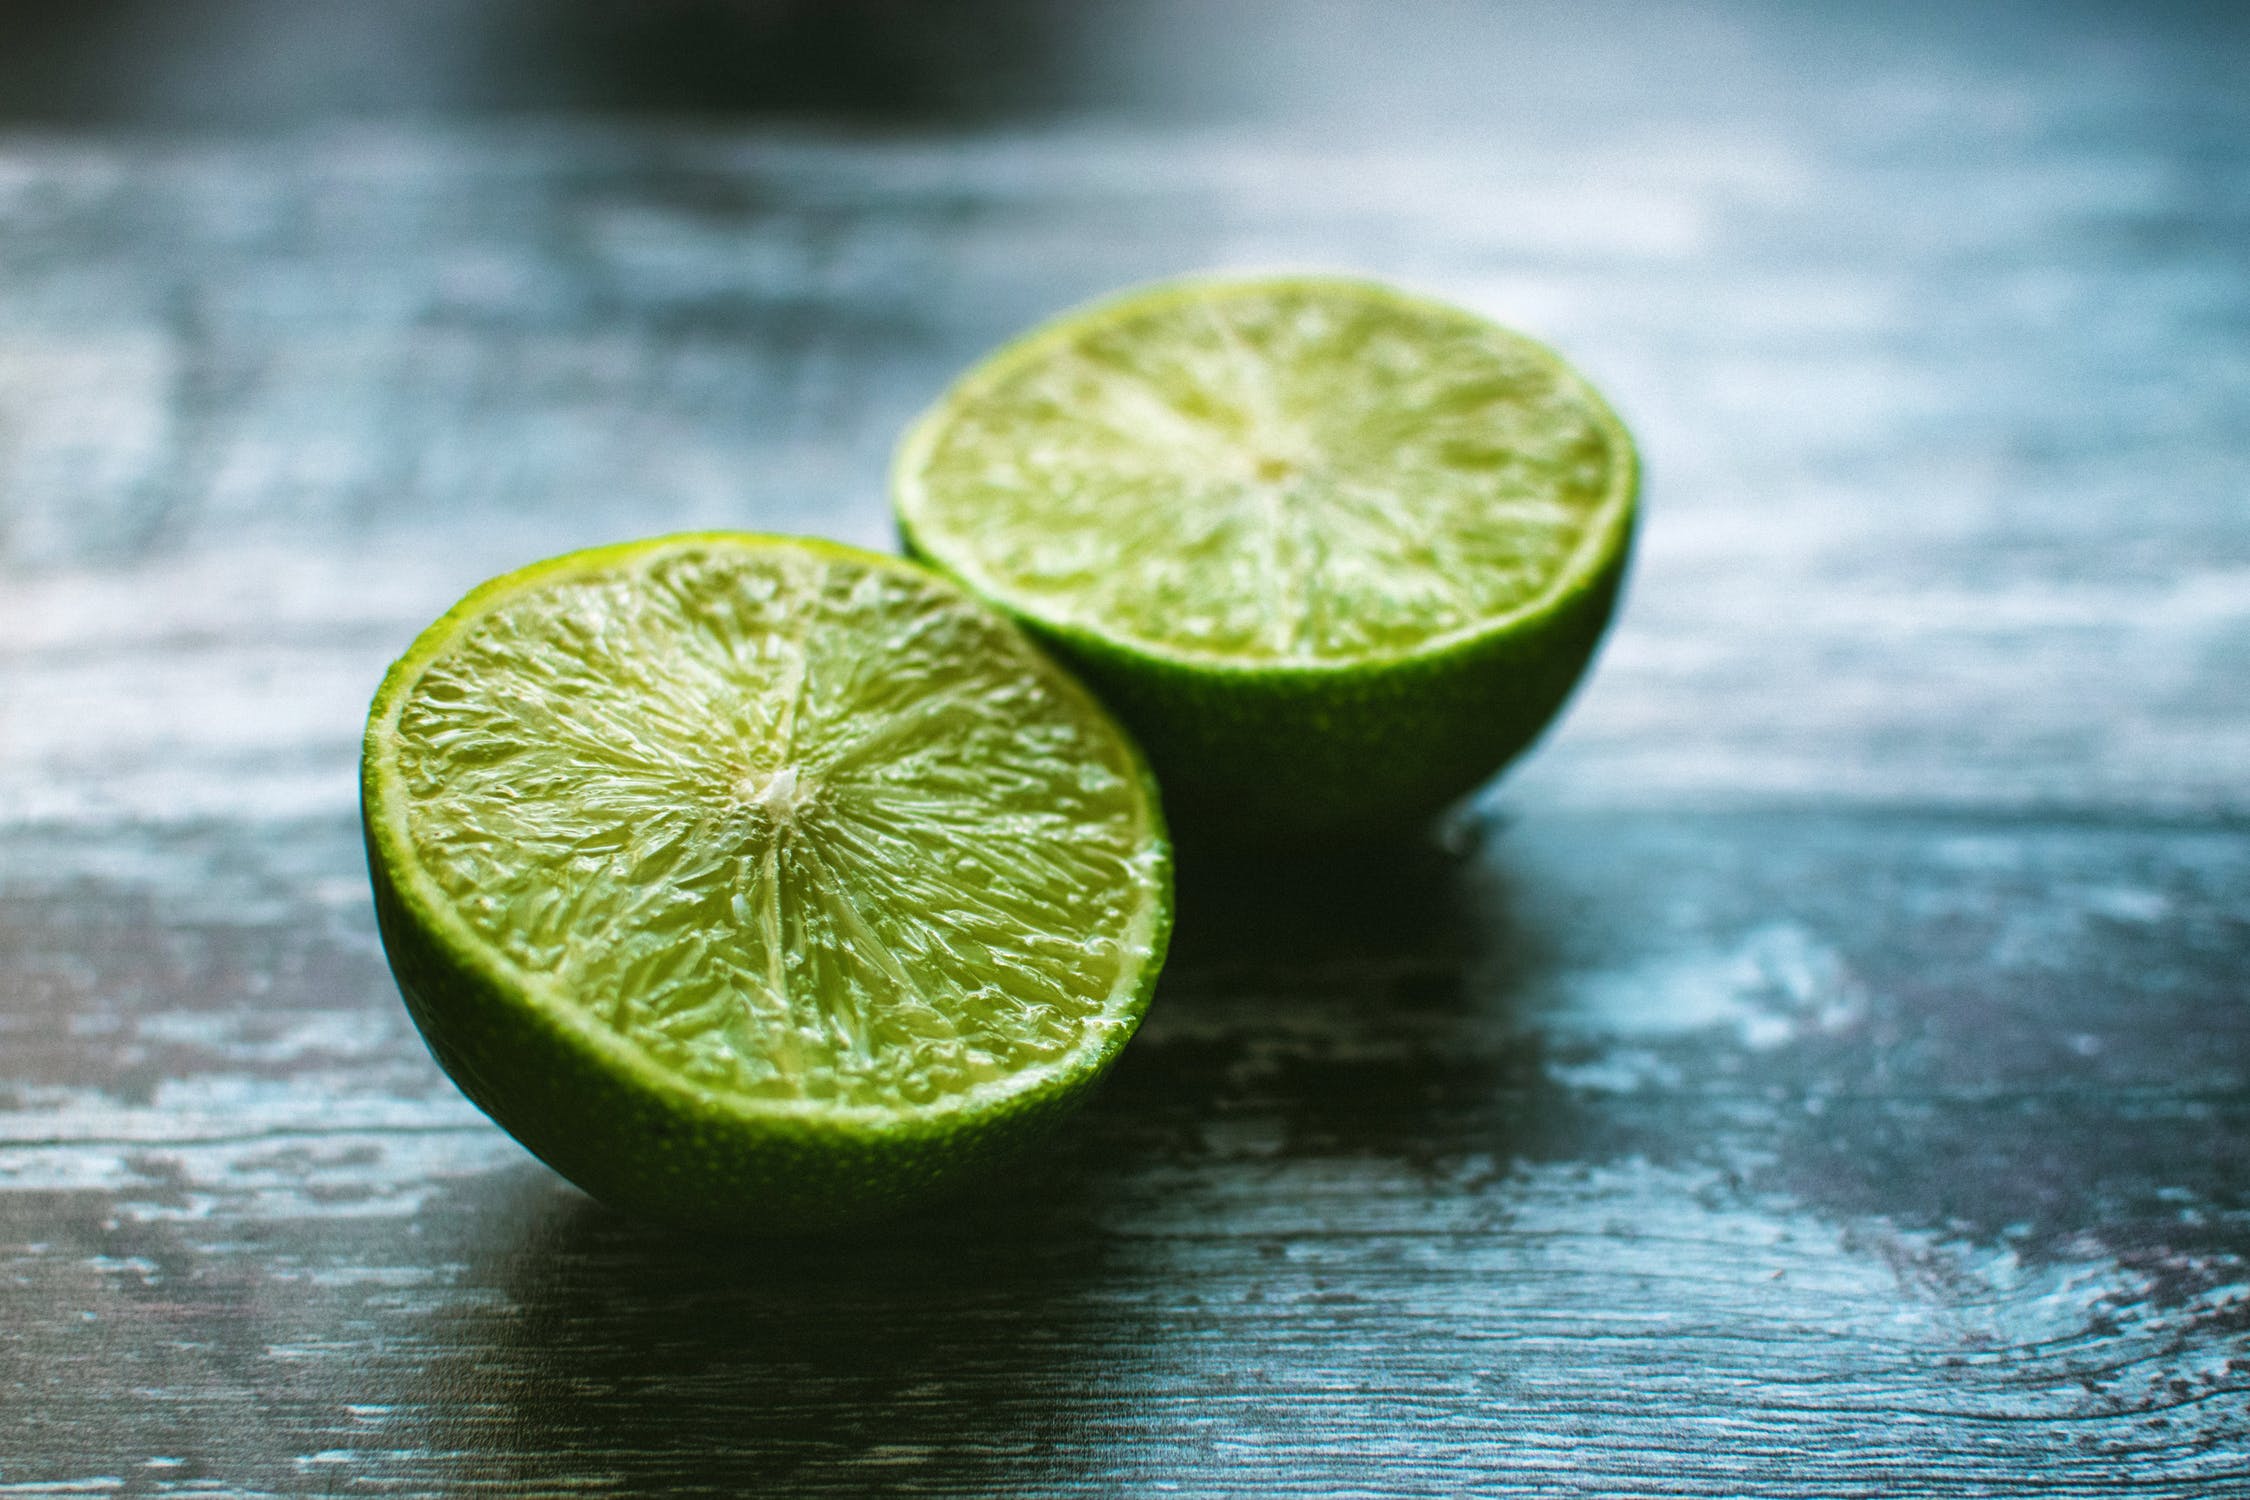 Fresh cut limes that can be used in an alcohol free beverage